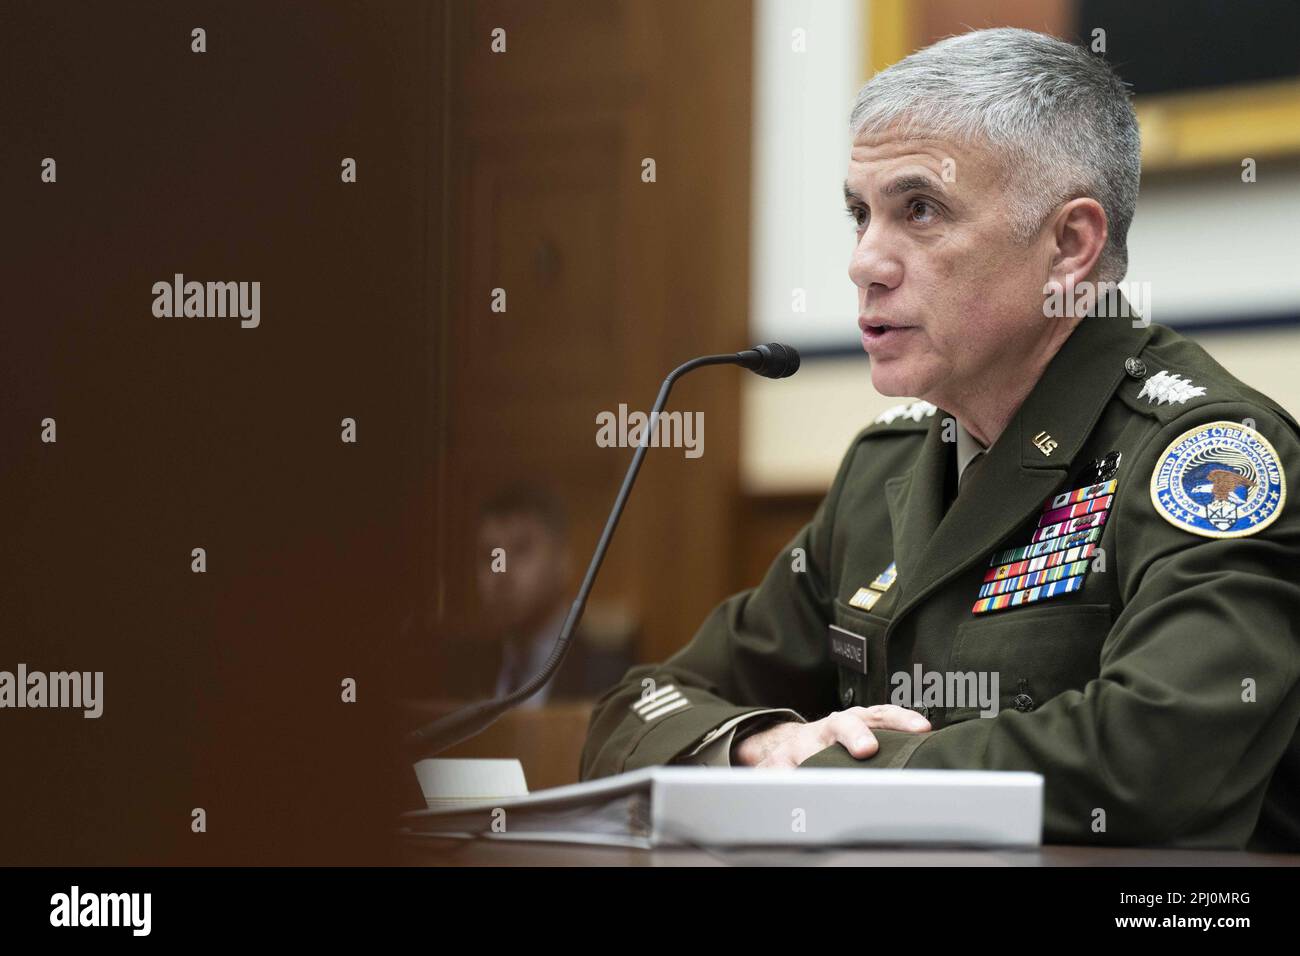 Washington, United States. 30th Mar, 2023. Commander of the U.S. Cyber Command Gen. Paul Nakasone speaks during a House Armed Services Subcommittee hearing on Cyber, Information Technologies and Innovation at the U.S. Capitol in Washington, DC on Thursday, March 30, 2023. Photo by Bonnie Cash/UPI Credit: UPI/Alamy Live News Stock Photo